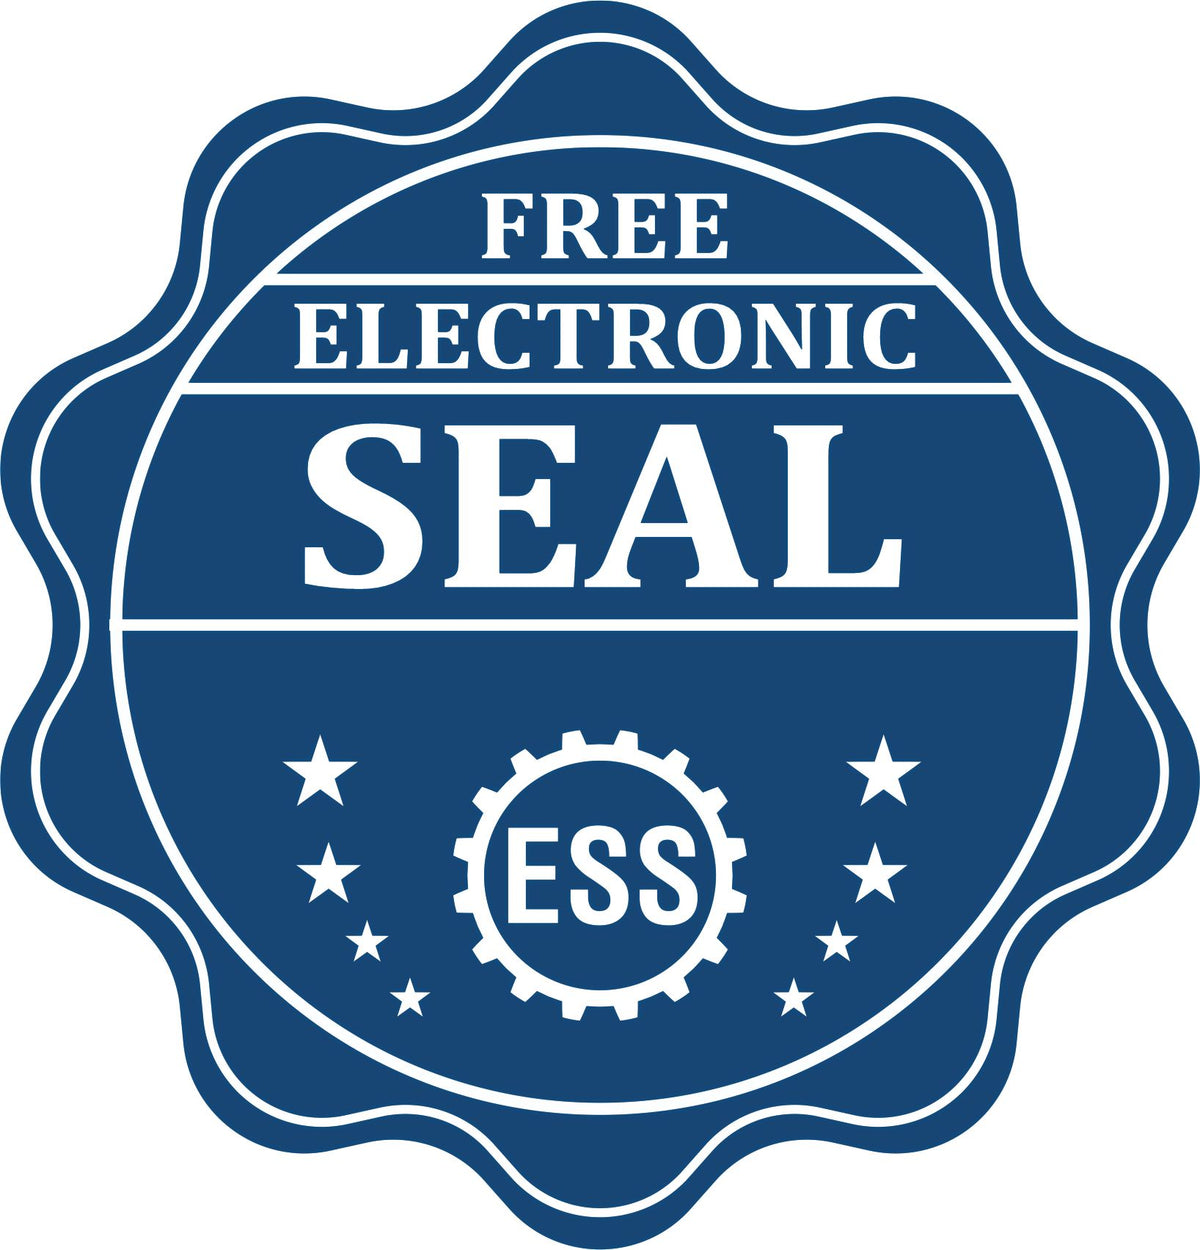 A badge showing a free electronic seal for the Gift Illinois Landscape Architect Seal with stars and the ESS gear on the emblem.